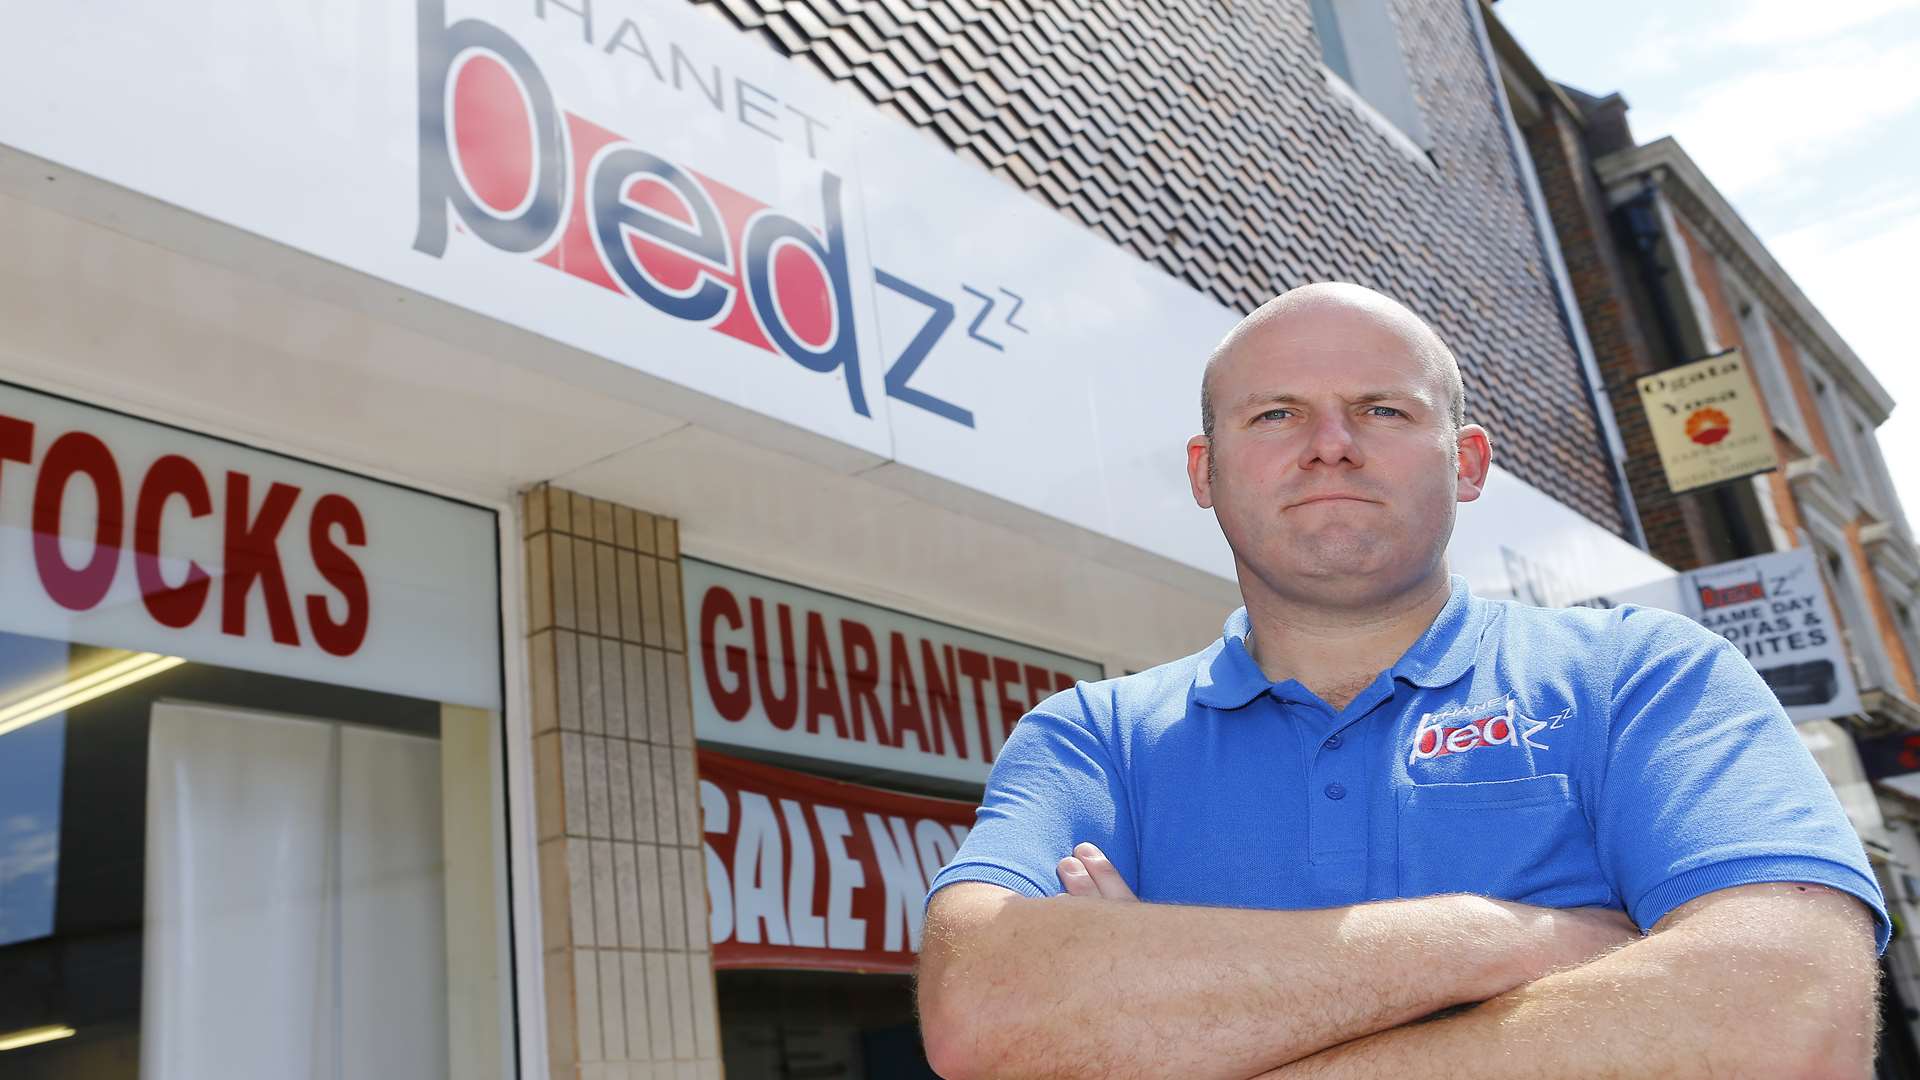 Thanet Bedz director Jamie Knight is closing his Margate store due to repeated vandalism